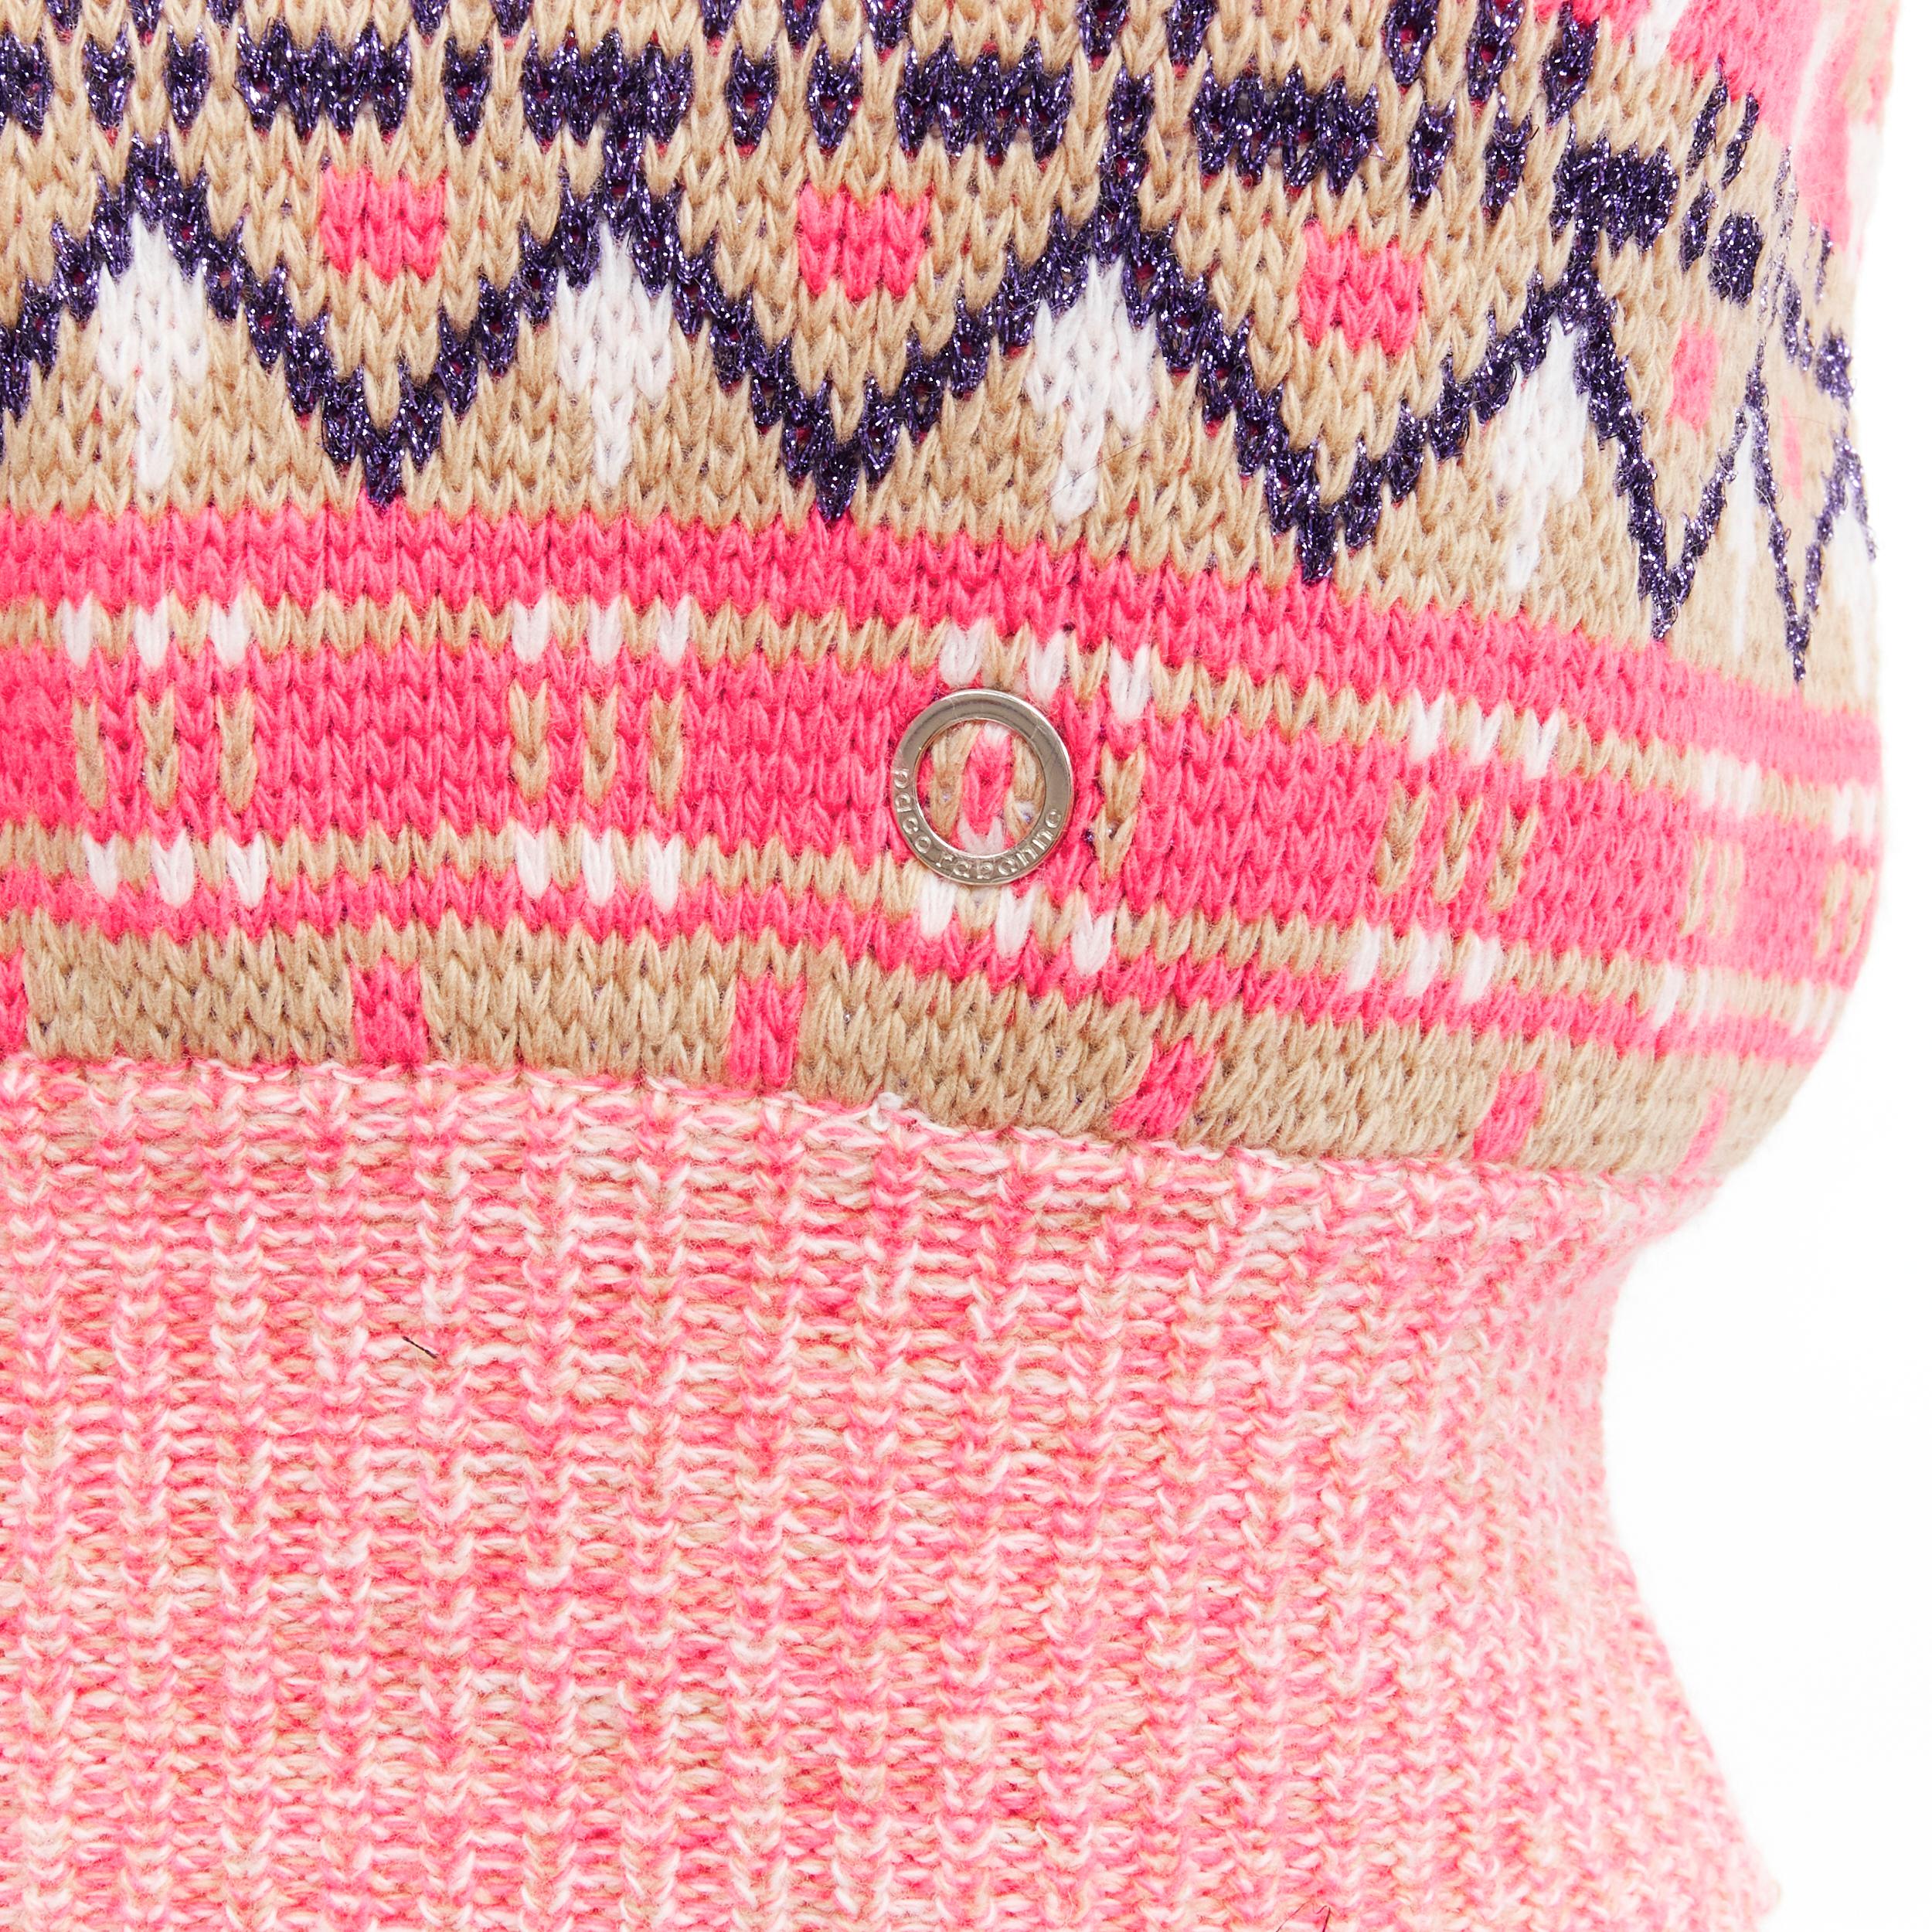 PACO RABANNE pink purple lurex virgin wool graphic knit vest XS
Reference: AAWC/A00457
Brand: Paco Rabanne
Material: Virgin Wool, Blend
Color: Pink, Purple
Pattern: Graphic
Closure: Pullover
Extra Details: Paco Rabanne logo ring detail at center